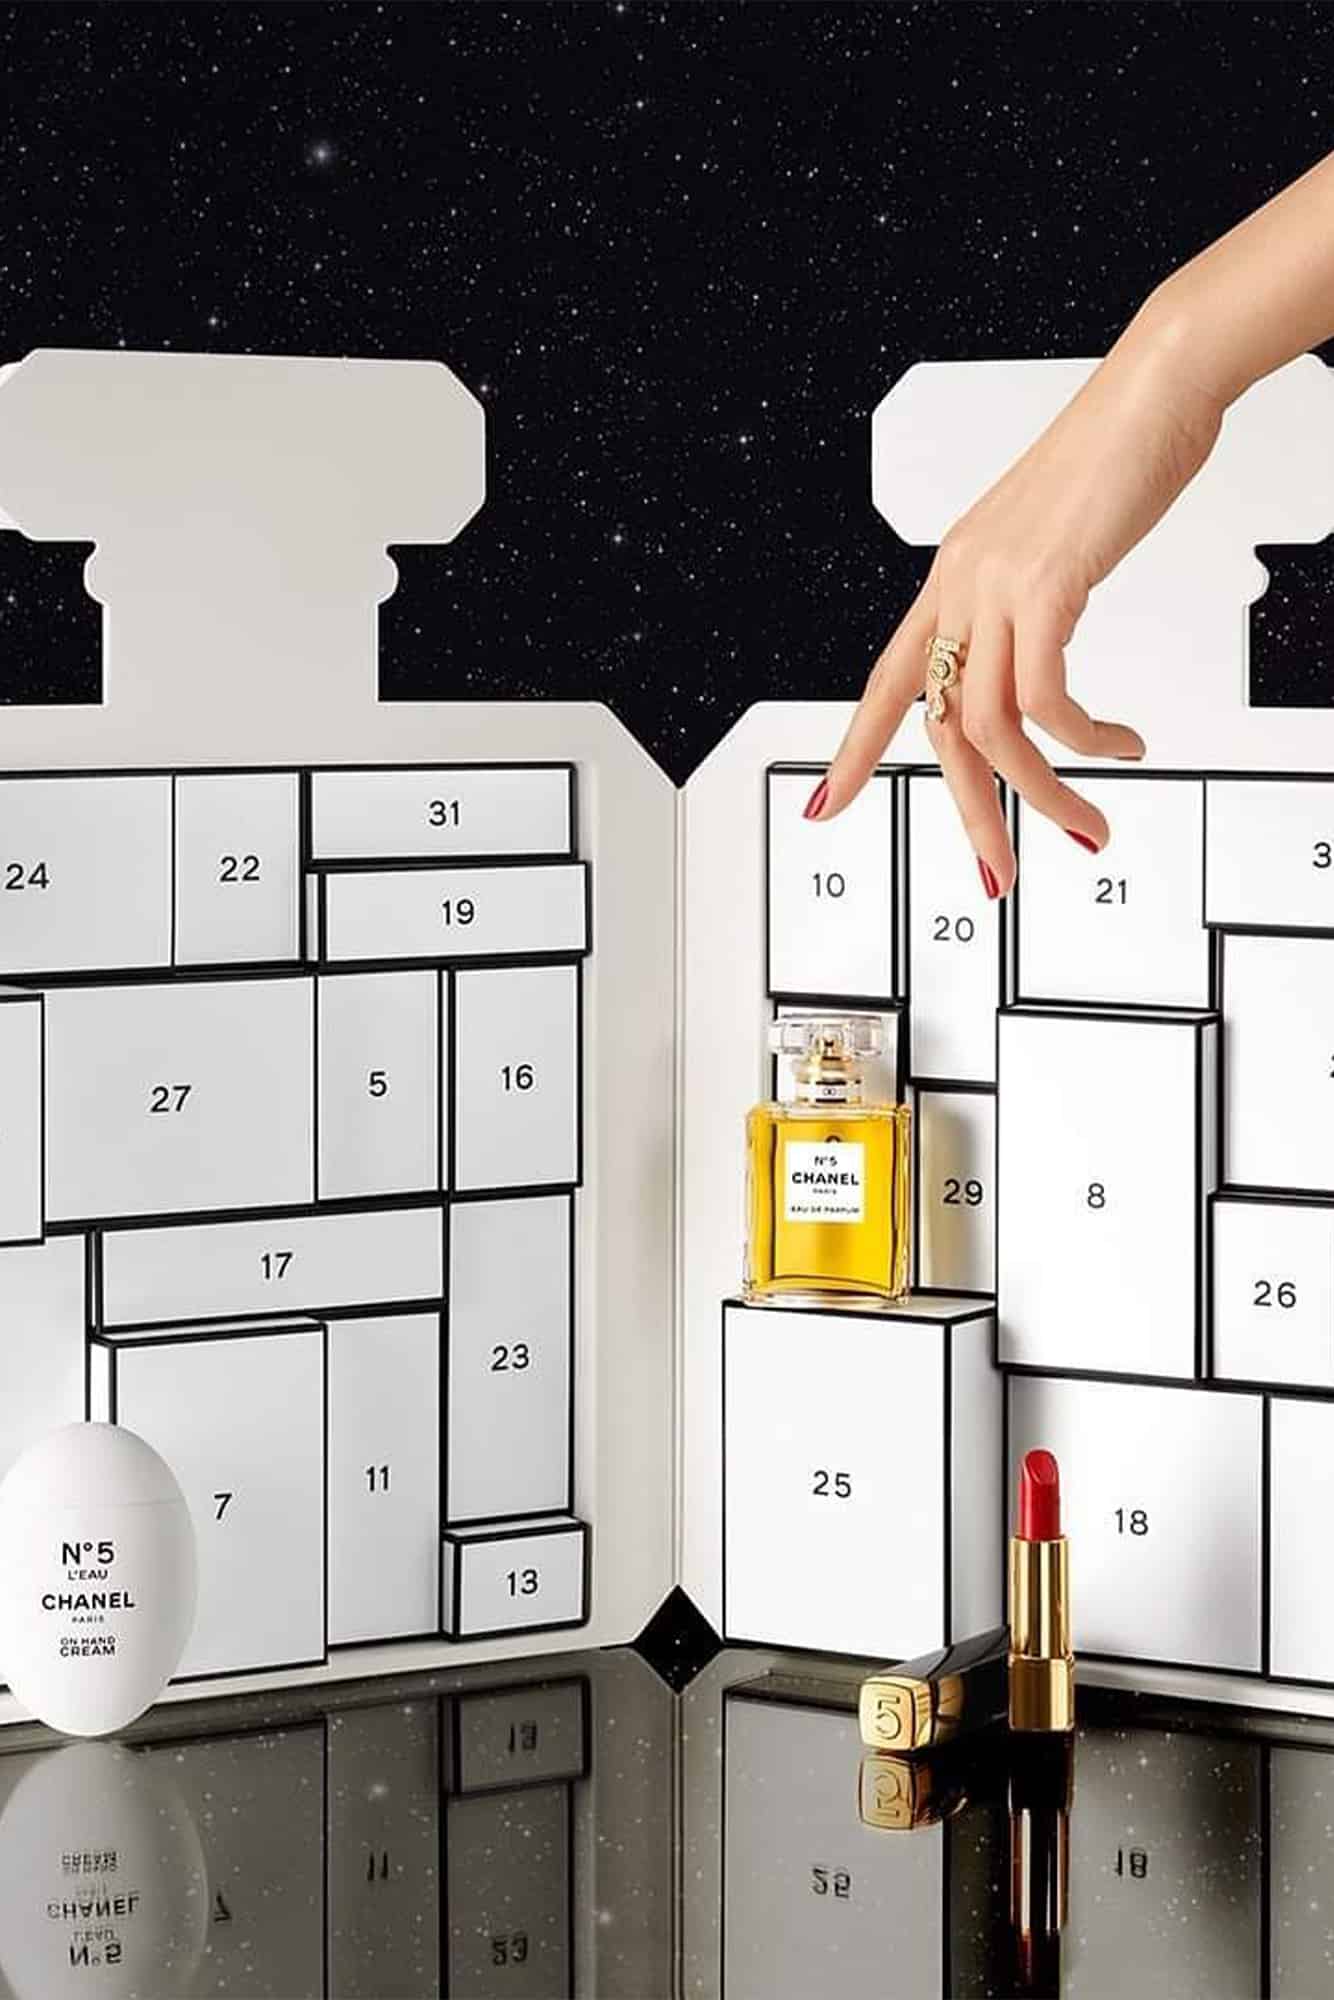 TikTok’s backlash to Chanel’s beauty advent calendar is a lesson for